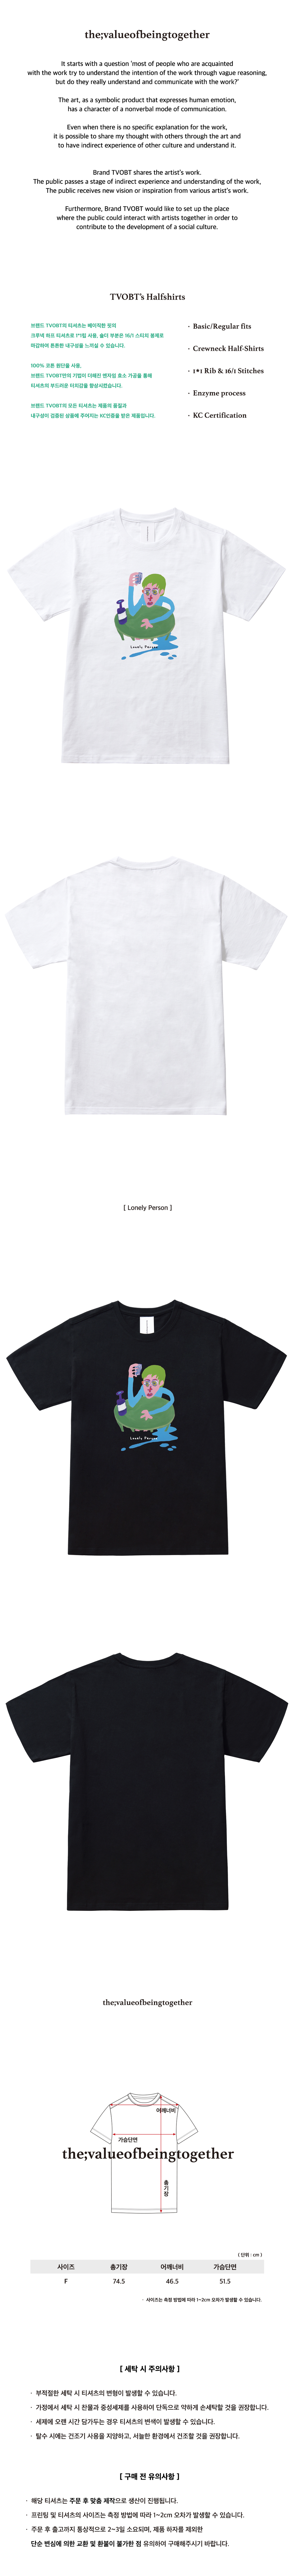 Lonely Person Halfshirts WH/BK